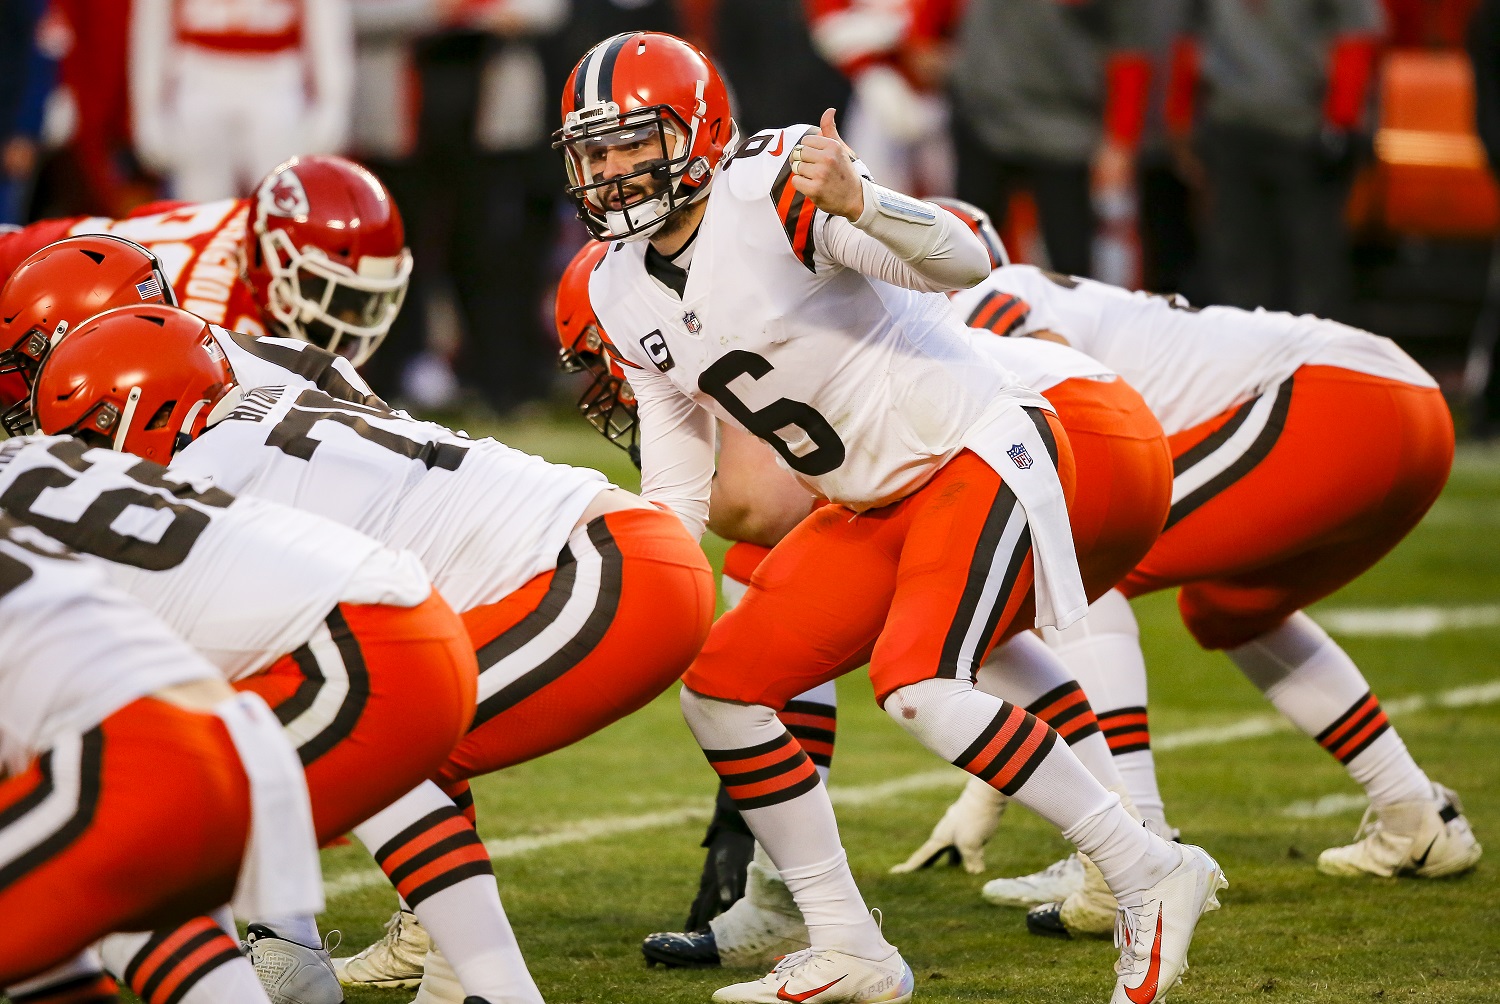 Quarterback Baker Mayfield, the No. 1 selection in the 2018 NFL draft, showed significant improvement in his third NFL season while leading the Cleveland Browns to a playoff berth. David Eulitt/Getty Images